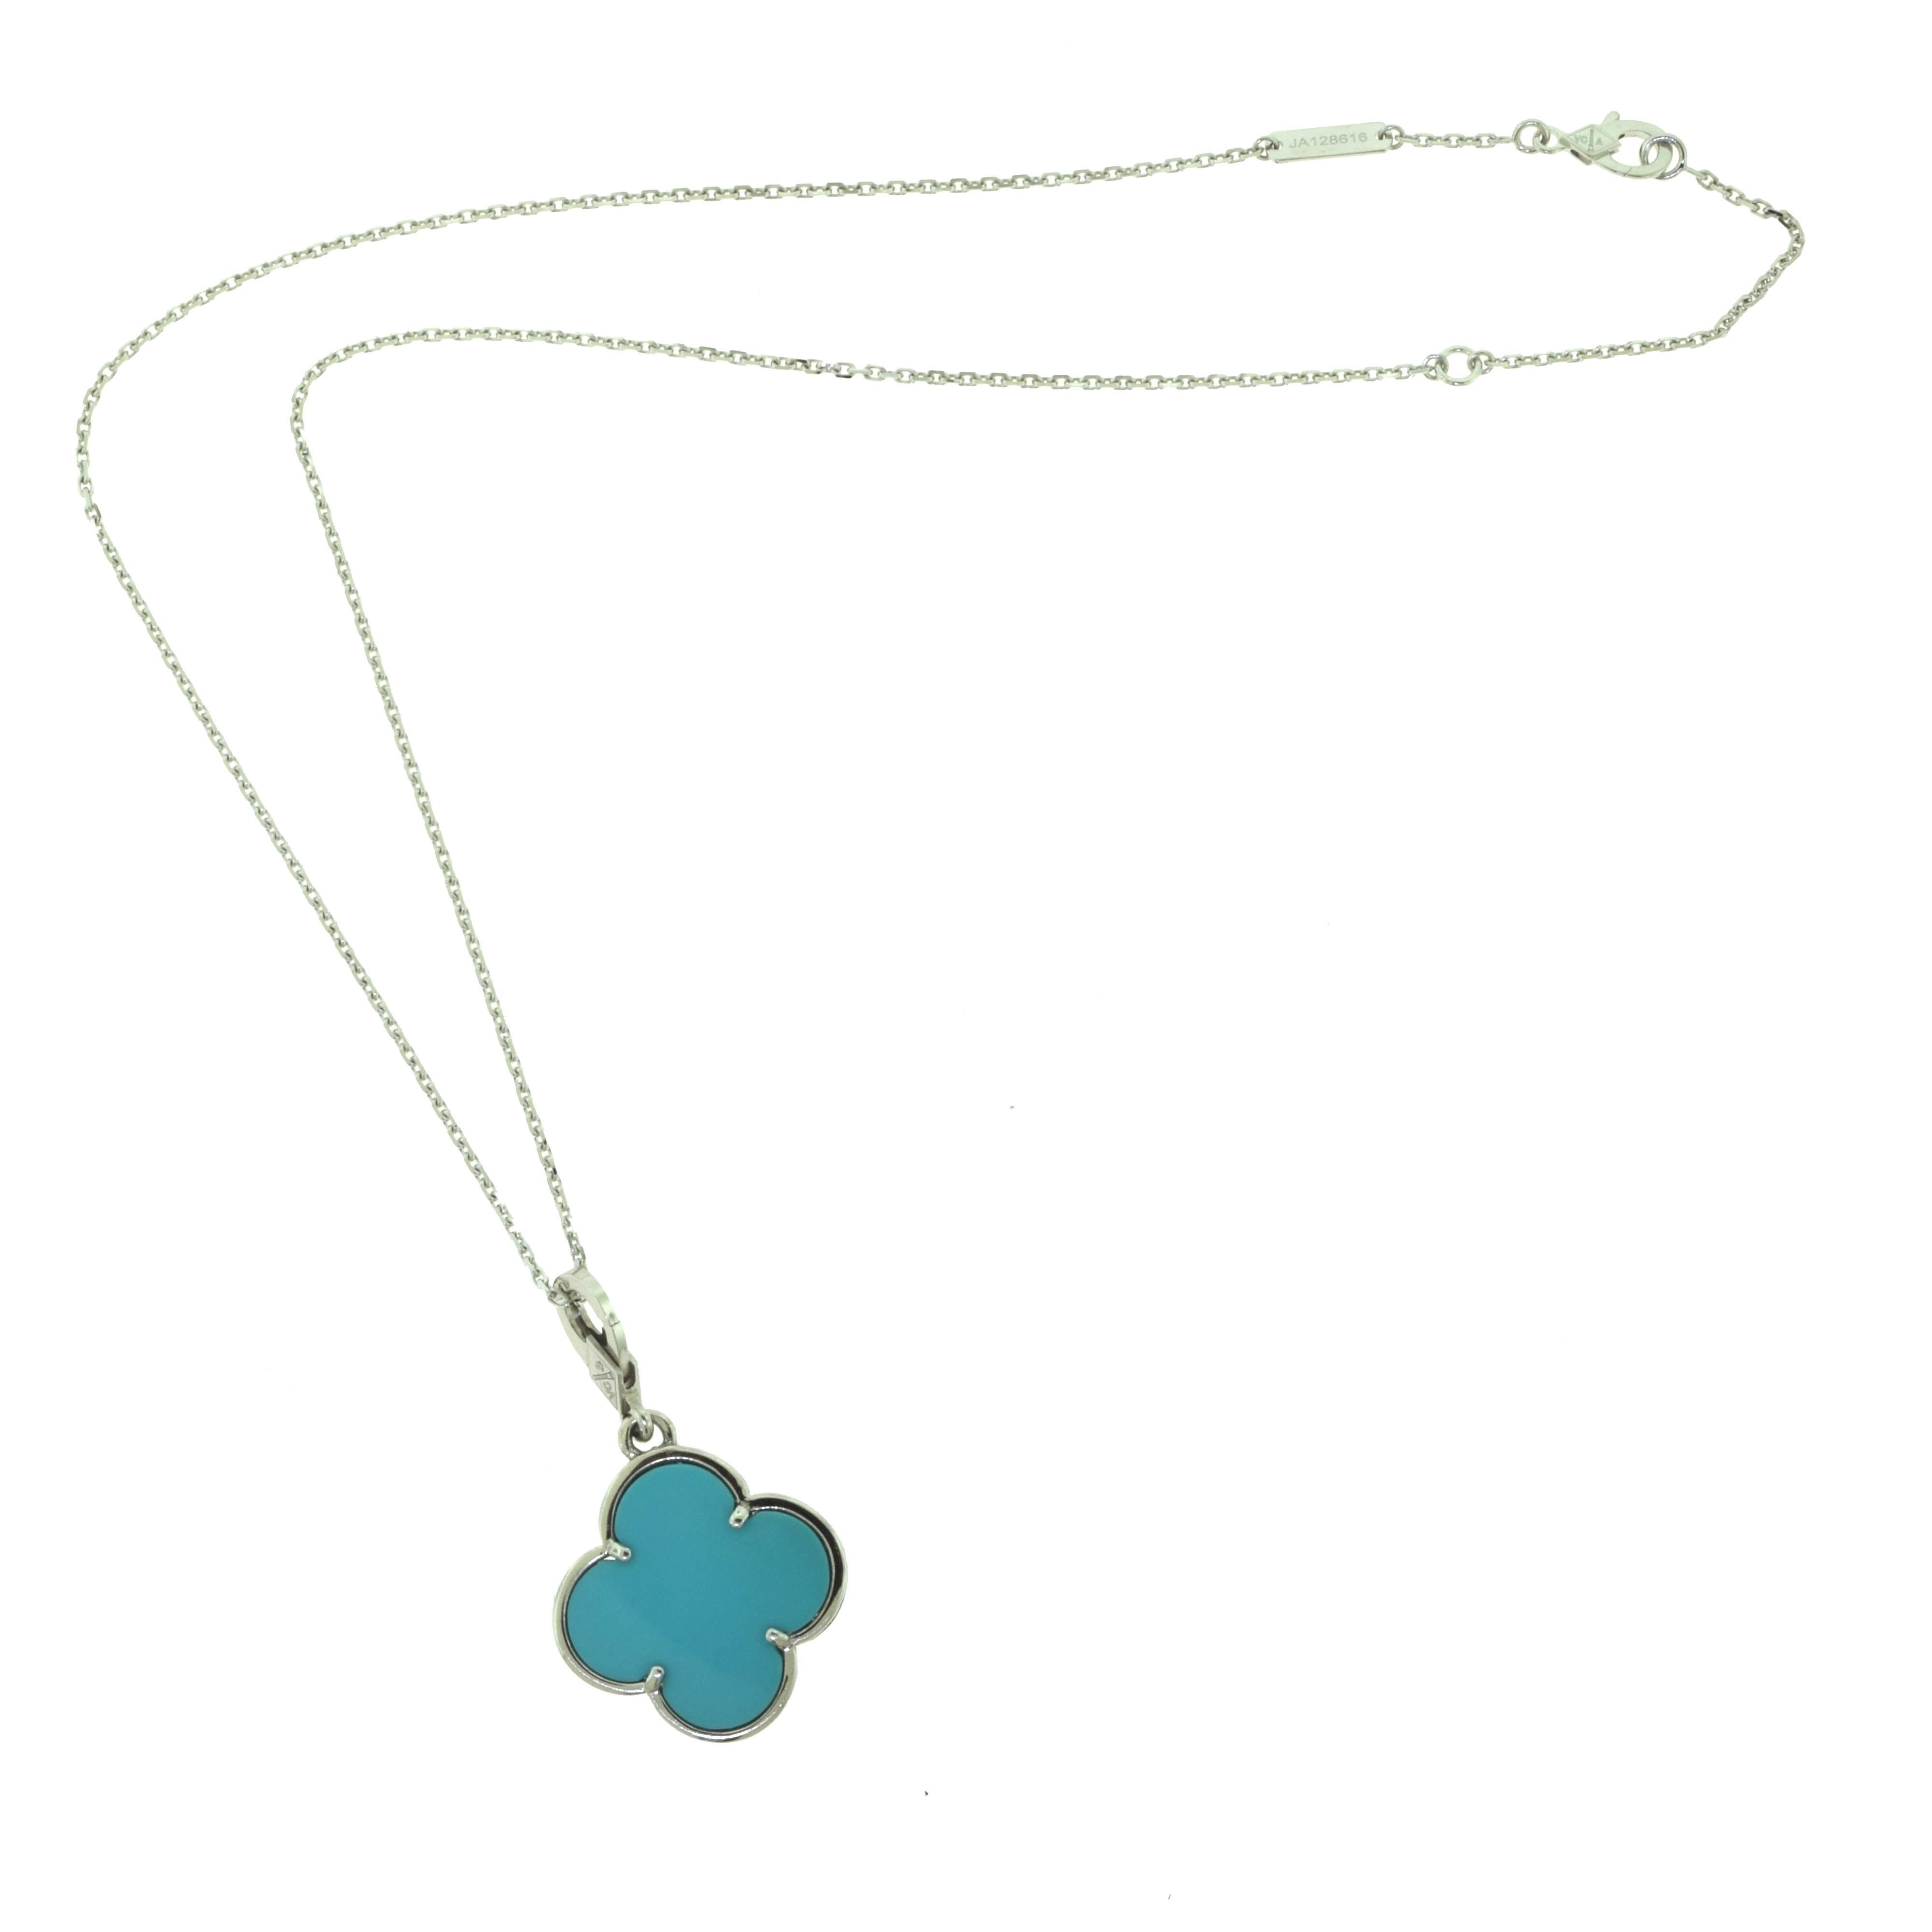 Designer: Van Cleef & Arpels
Collection: Magic Alhambra
Metal: 18 Karat White Gold
Stone: Turquoise
Chain Length: 14.5 inches, 16 inches (adjustable)
Total Item Weight (g): 8.2
Motif Dimensions: 22.39 x 14.01 mm
Motif Thickness: 2.11 mm
Collateral: